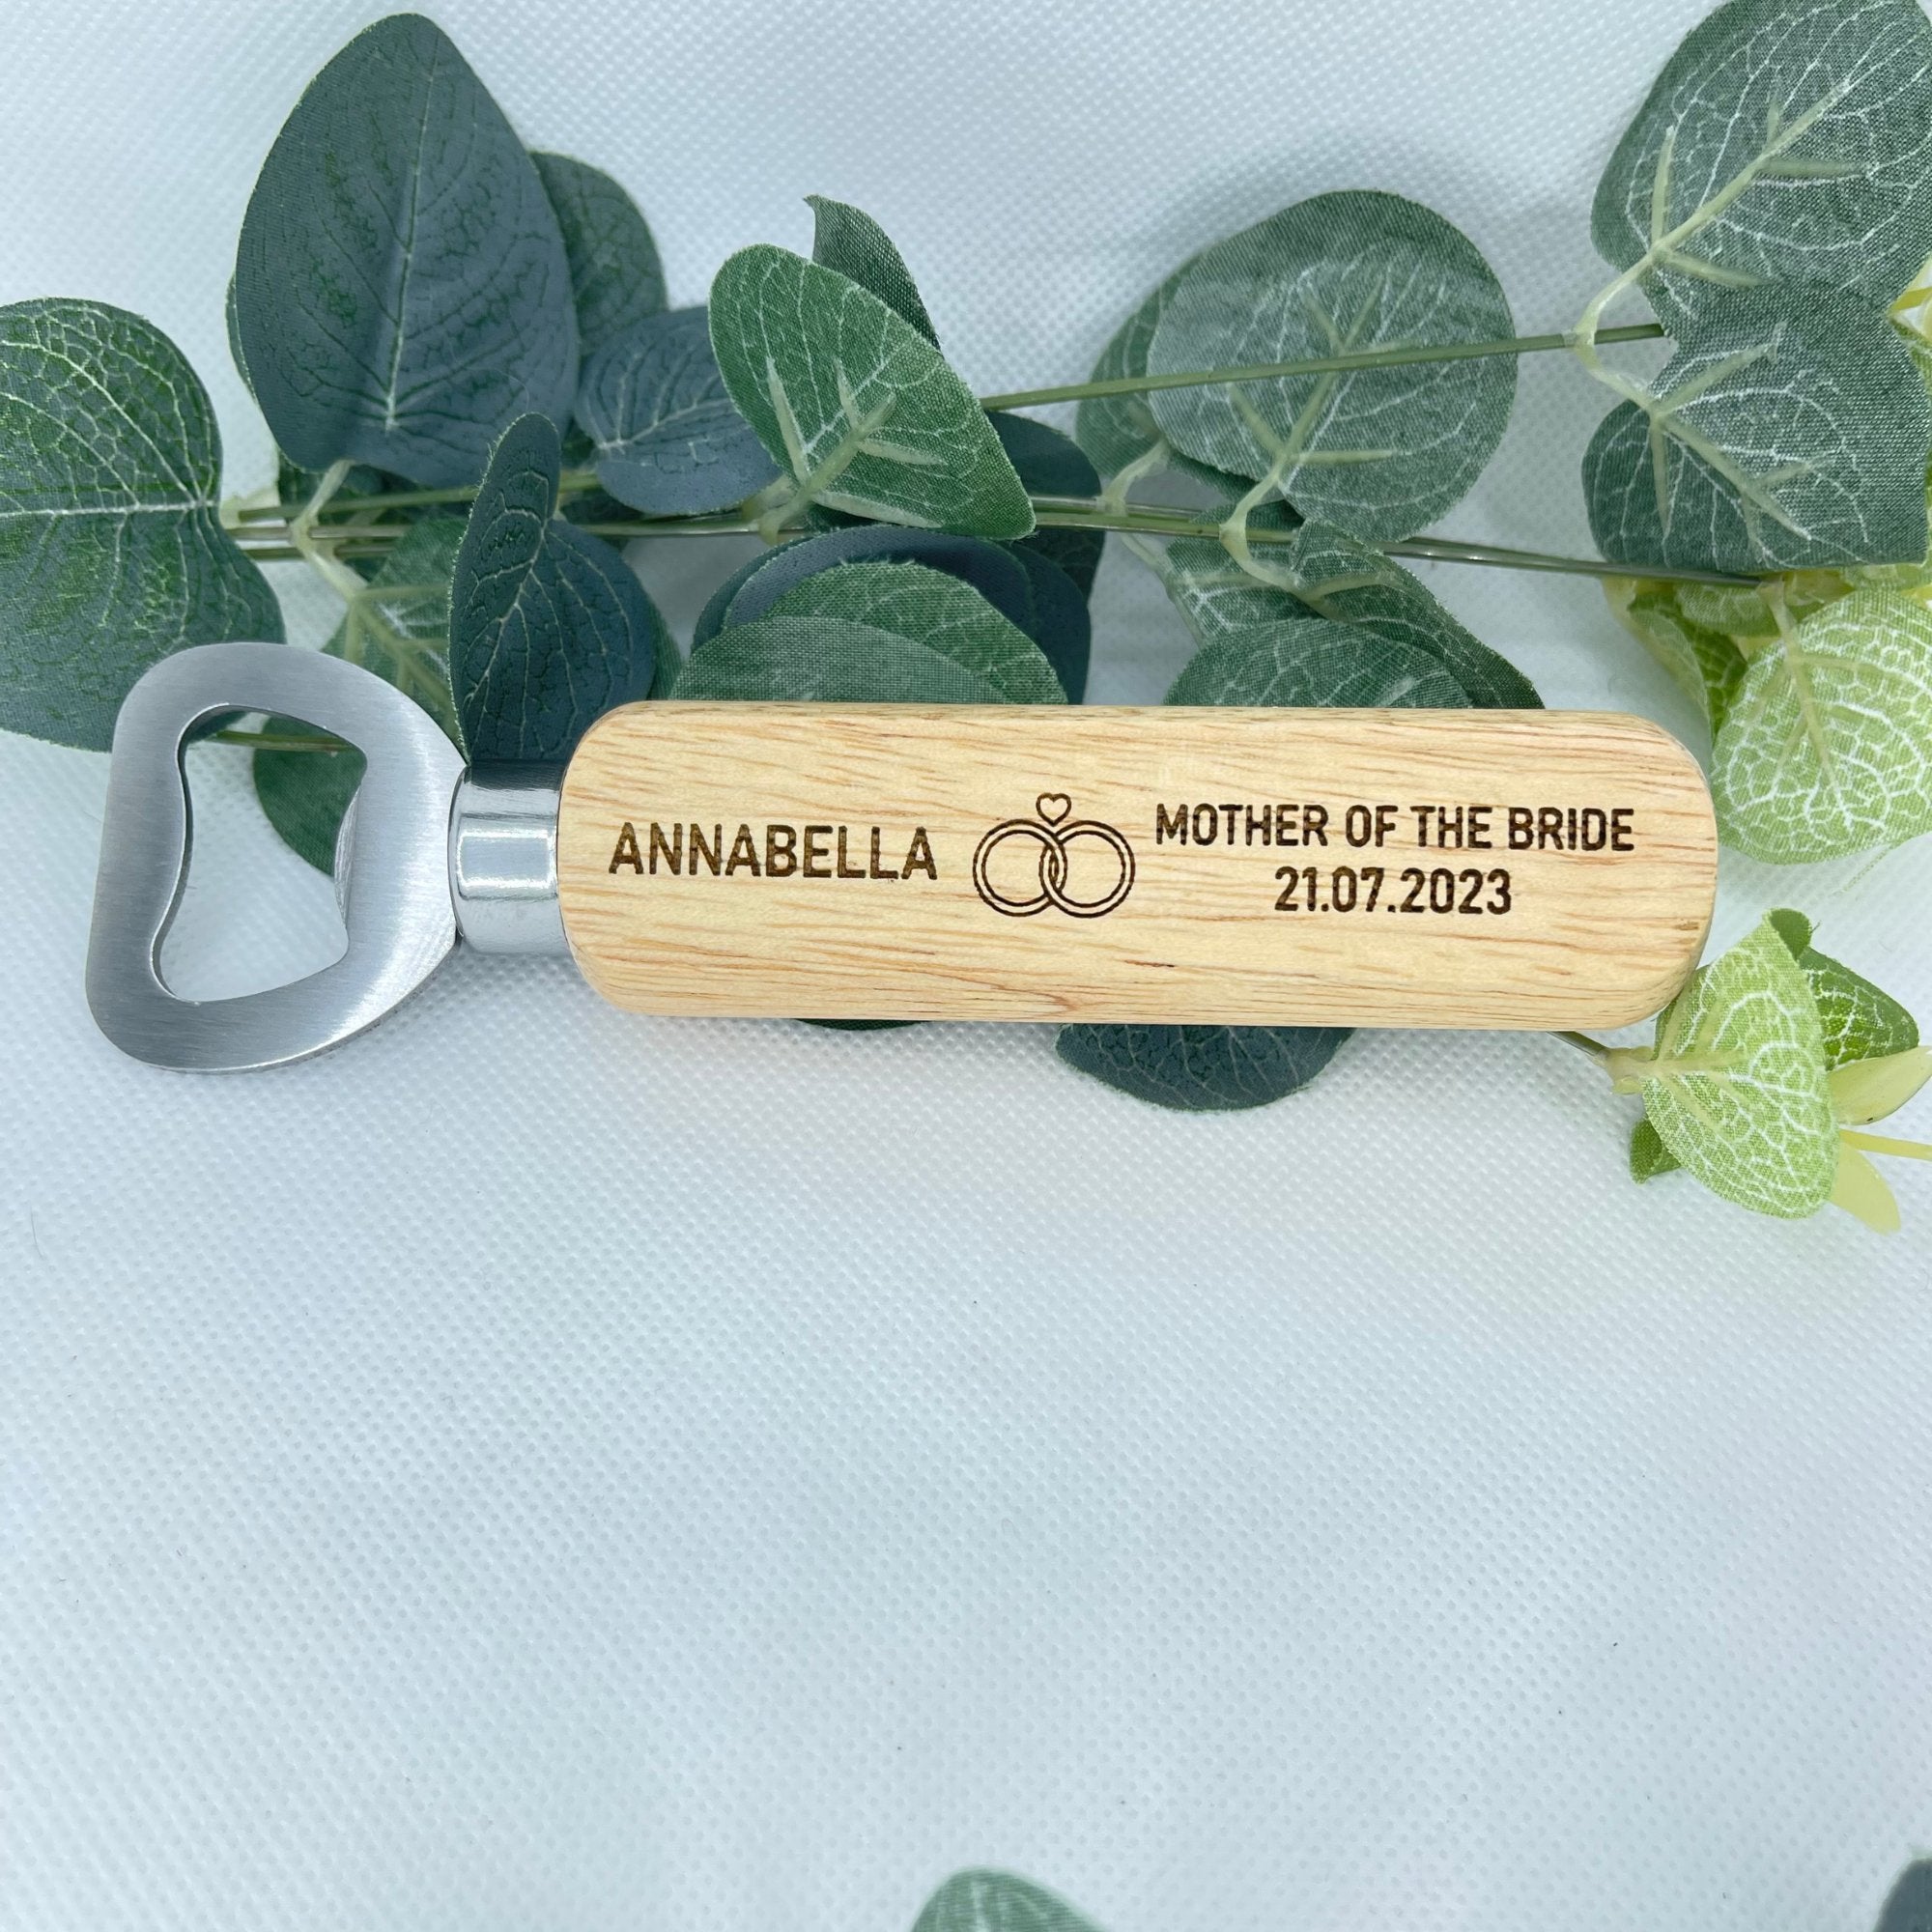 Bottle opener personalise with name at the left hand side, right role of wedding & date under. in the middle there is a picture of two rings & a heart on top. Perfect for wedding gifts. Bridesmaids with a girly touch.   